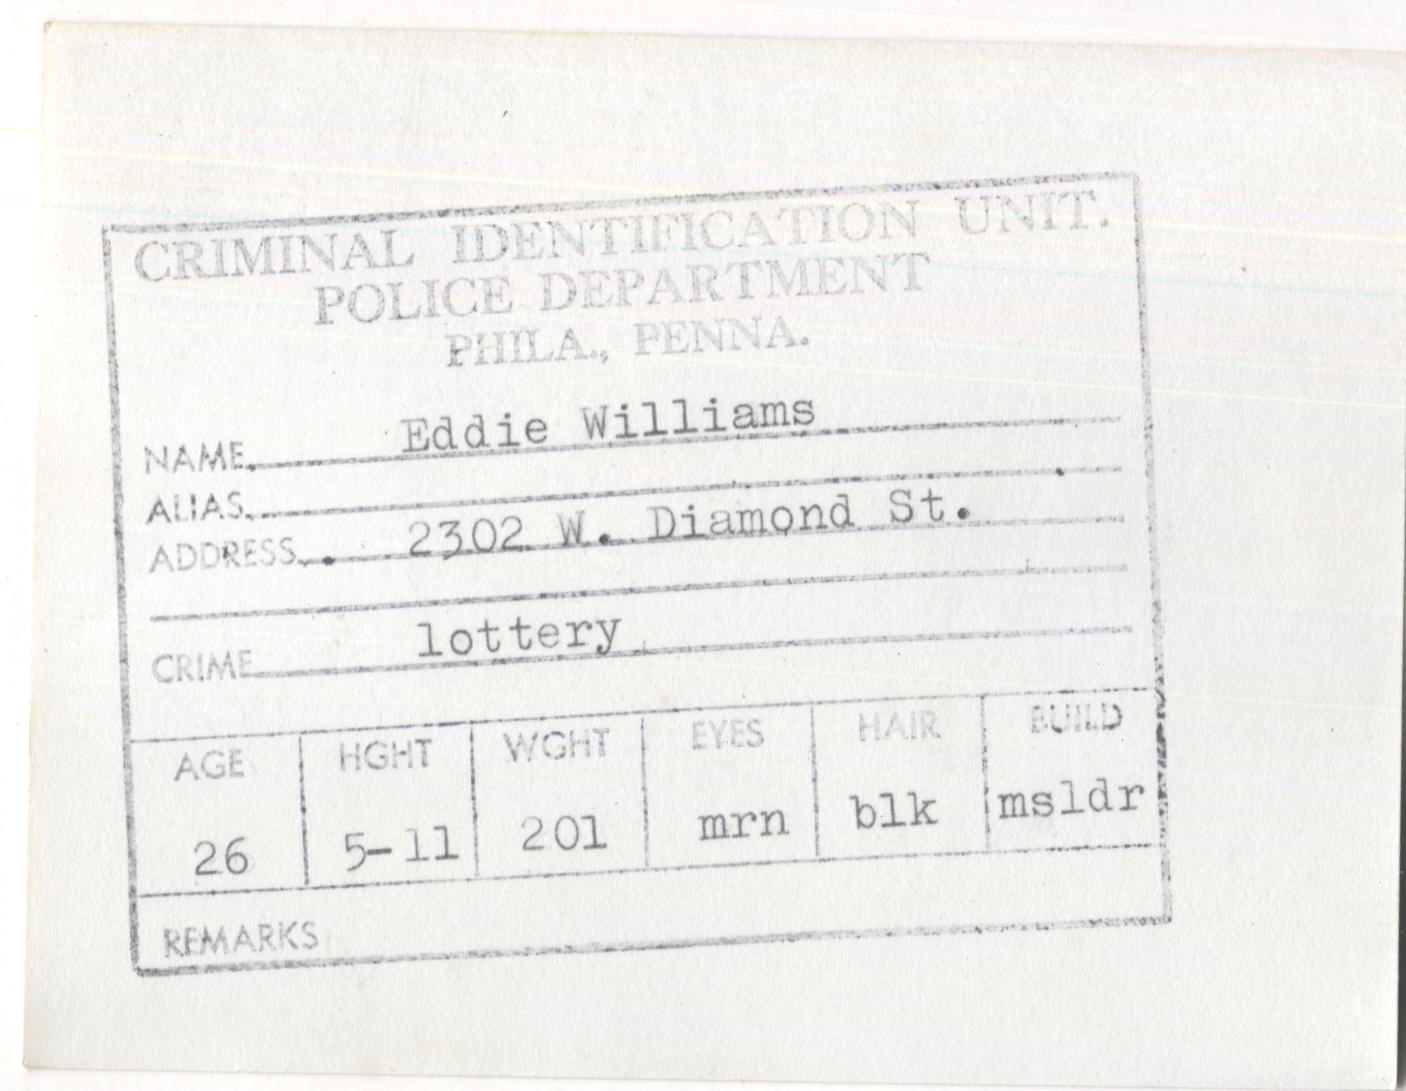 Eddie Williams Mugshot - Arrested on 10/31/1960 for Illegal Lottery